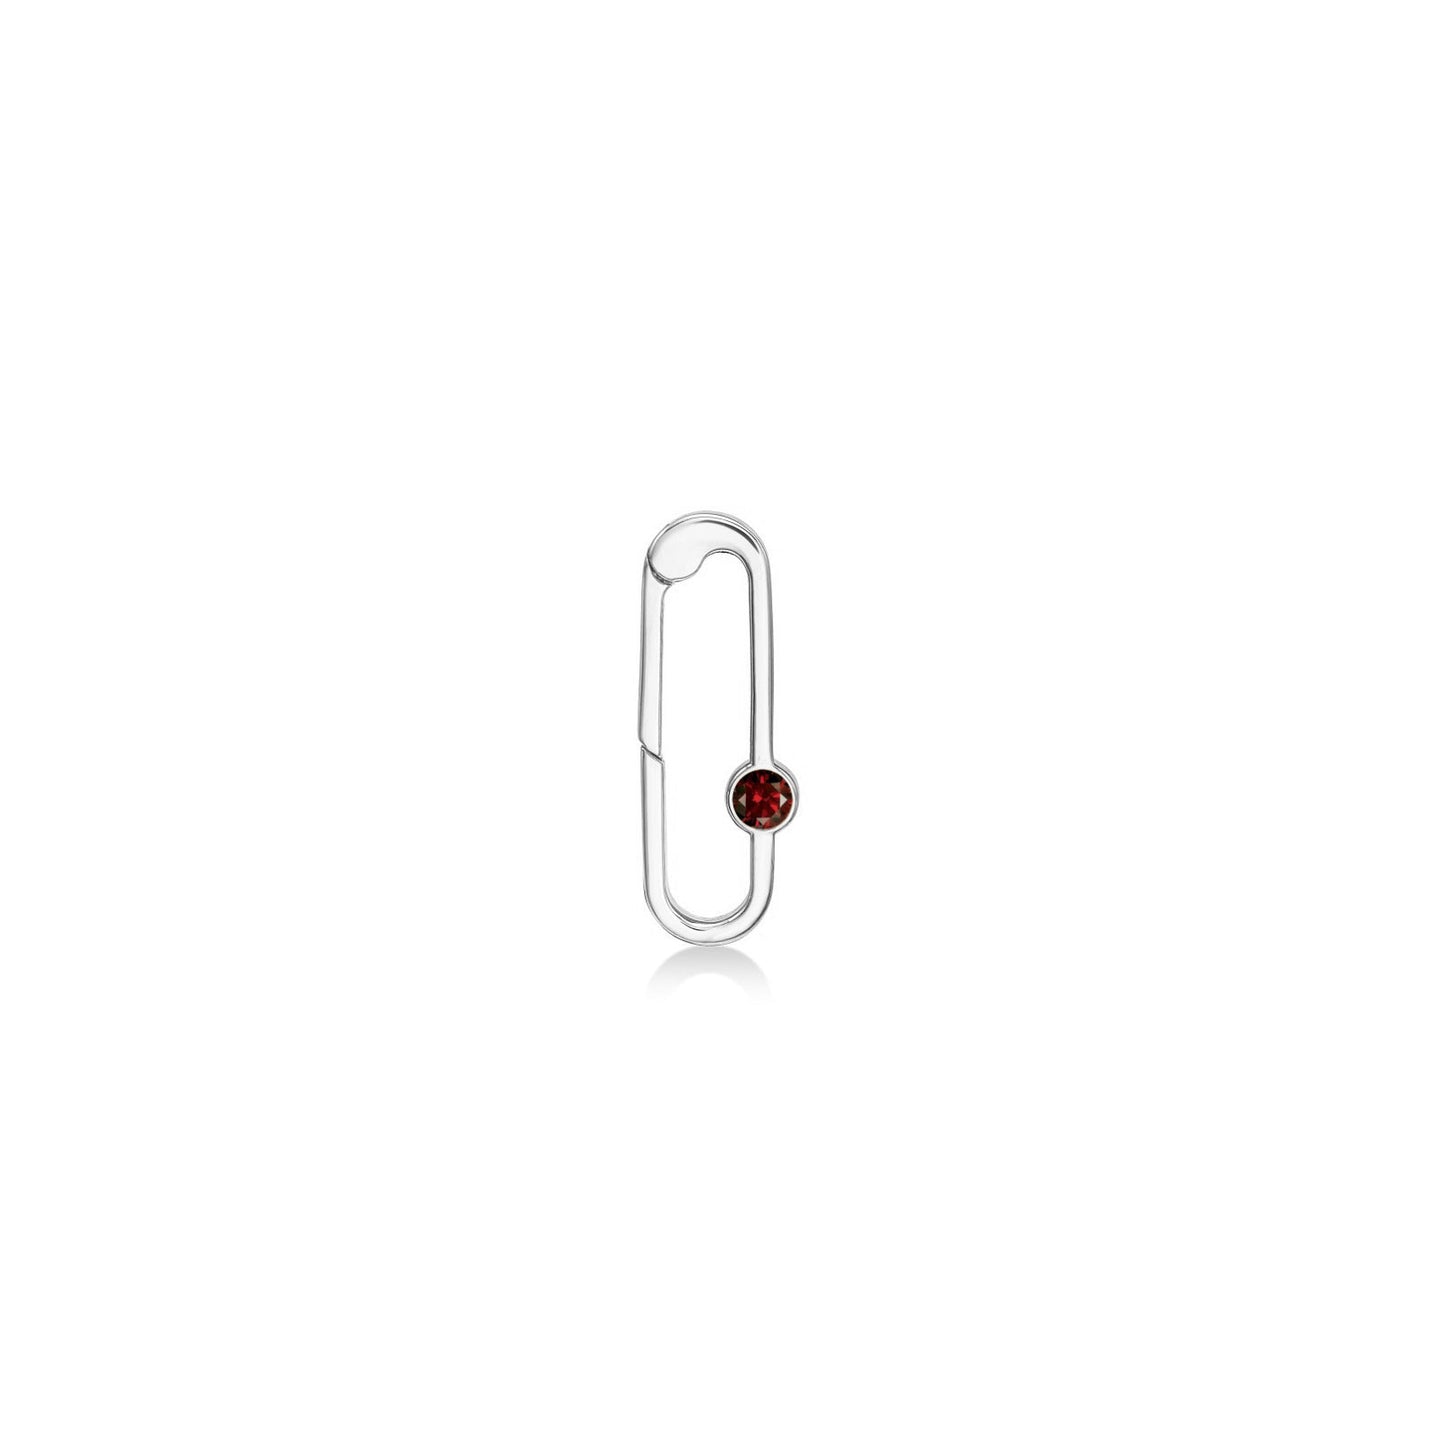 14k white gold paperclip charm lock with garnet